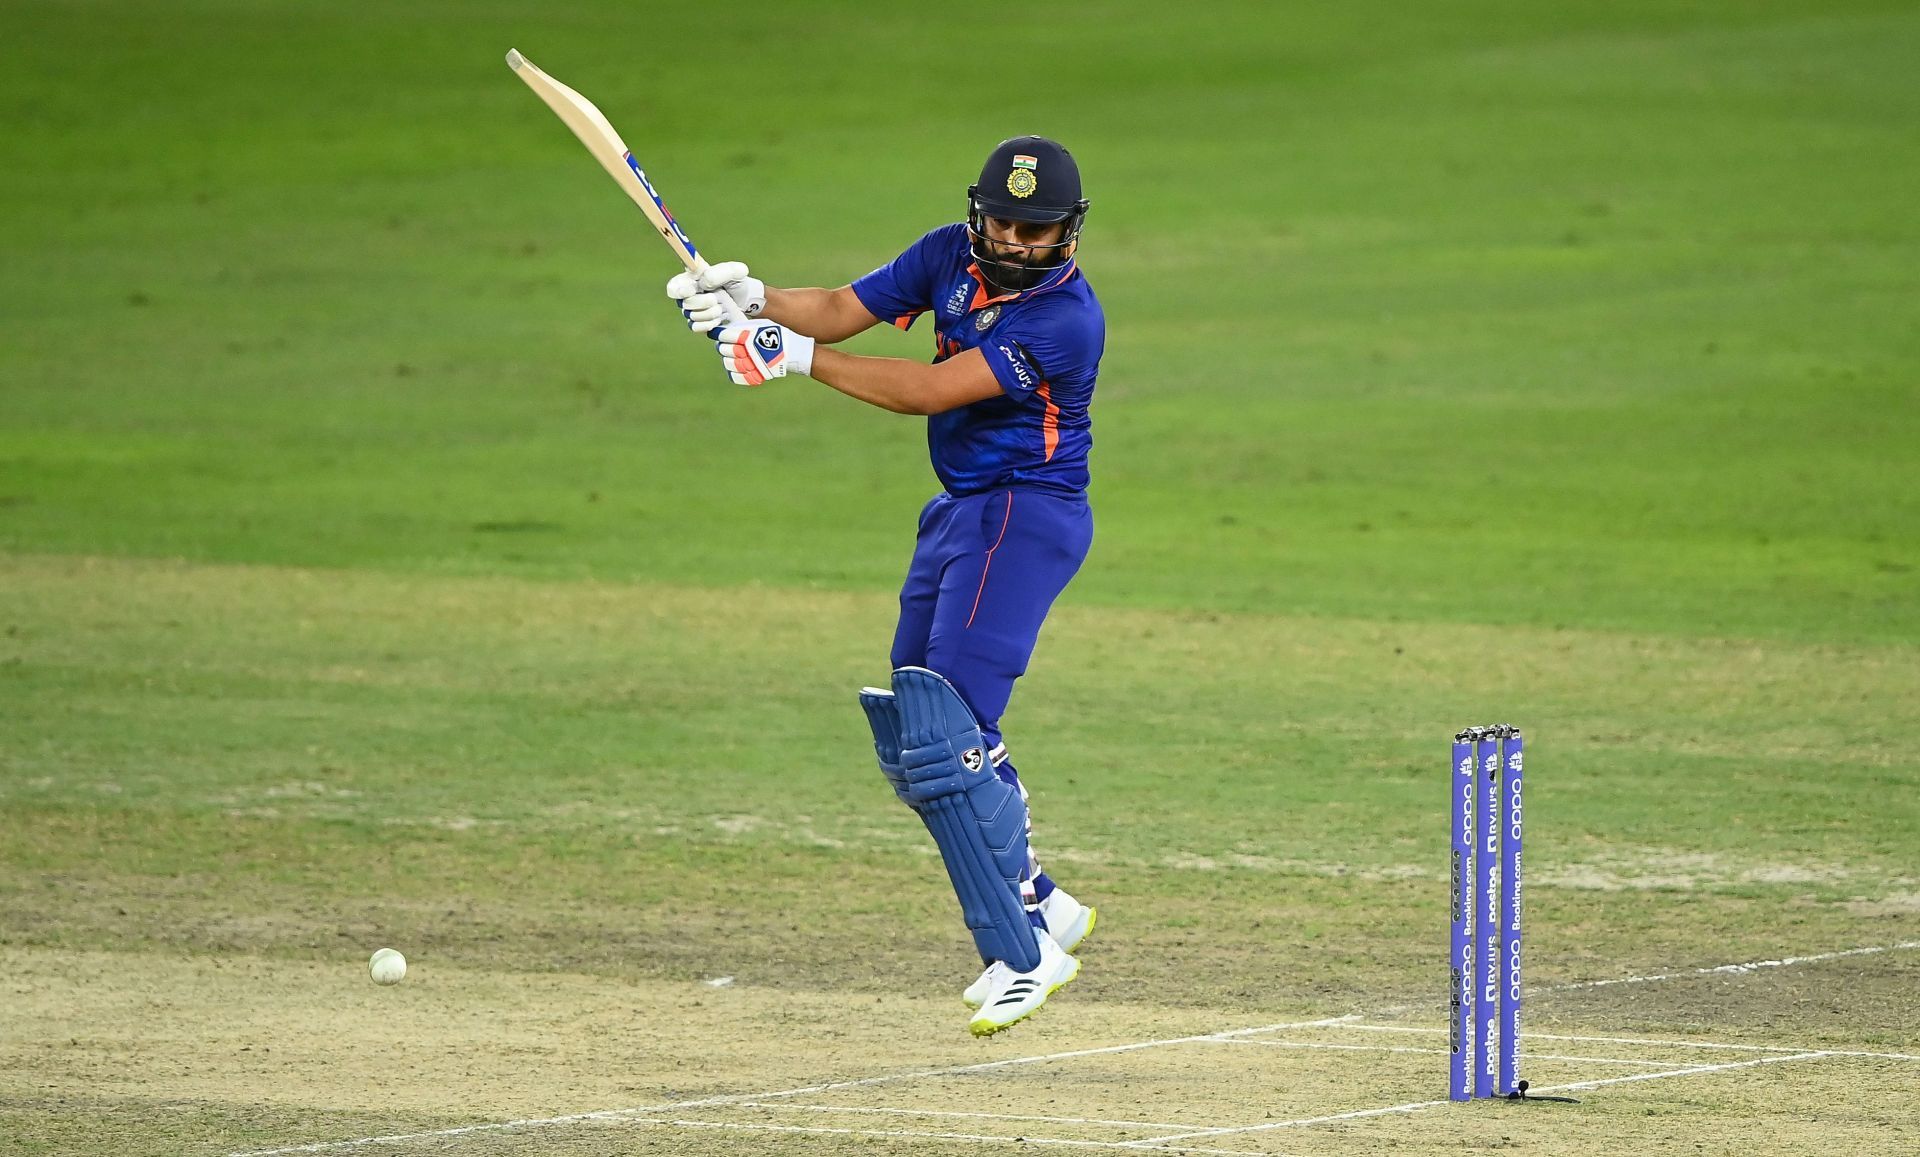 Aakash Chopra highlighted that Rohit Sharma did not look in control during the initial stages of his innings